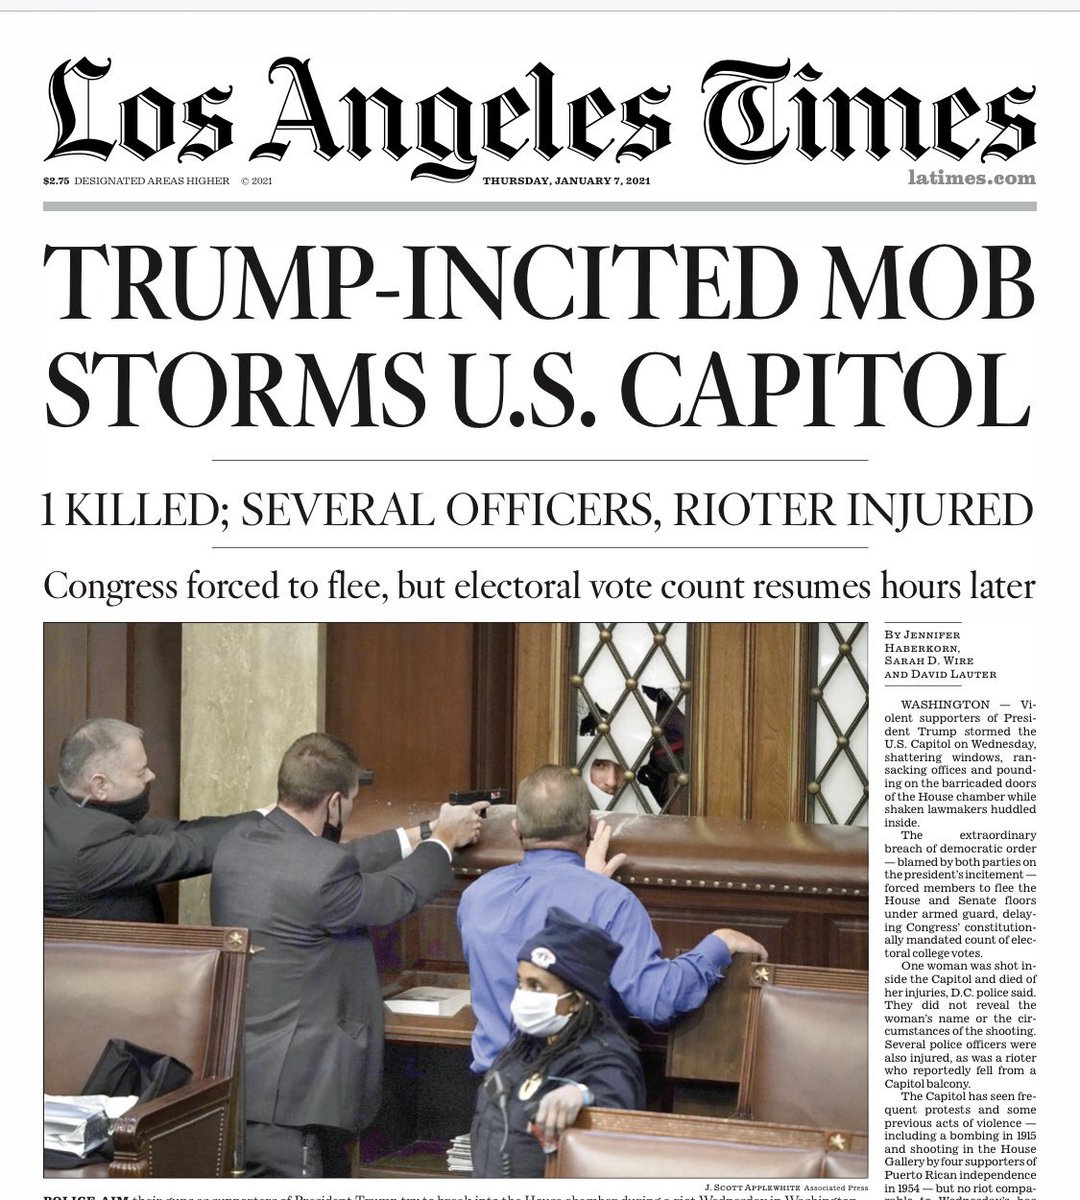 These are the newspapers’ front pages following the insurrection at the U.S. Capitol on Jan. 6, 2021. Please send me the ones that I’m missing. I’ll add more as they become available.11/